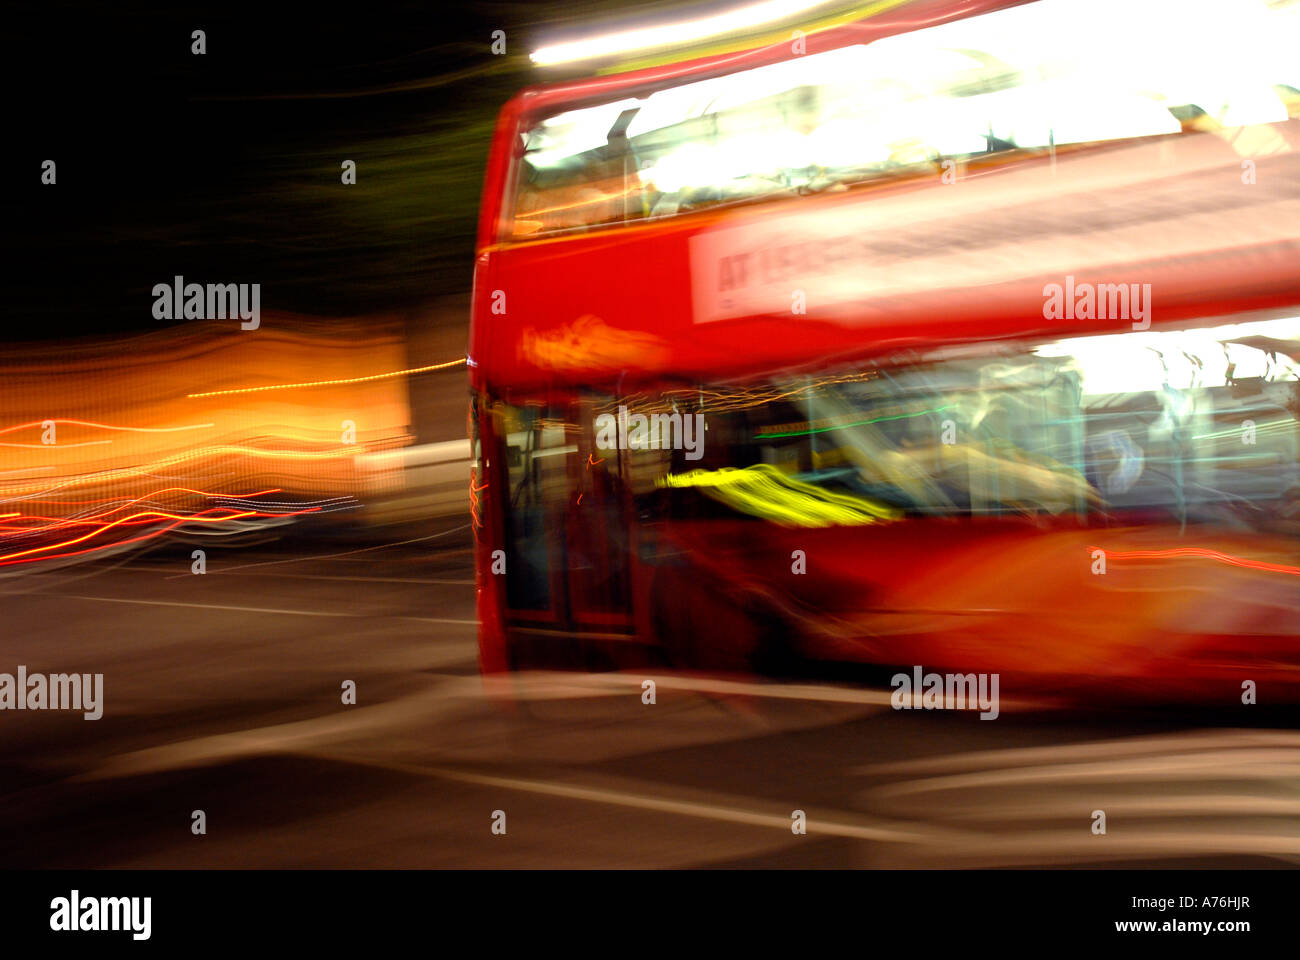 Red double decker bus at night blur image London Stock Photo